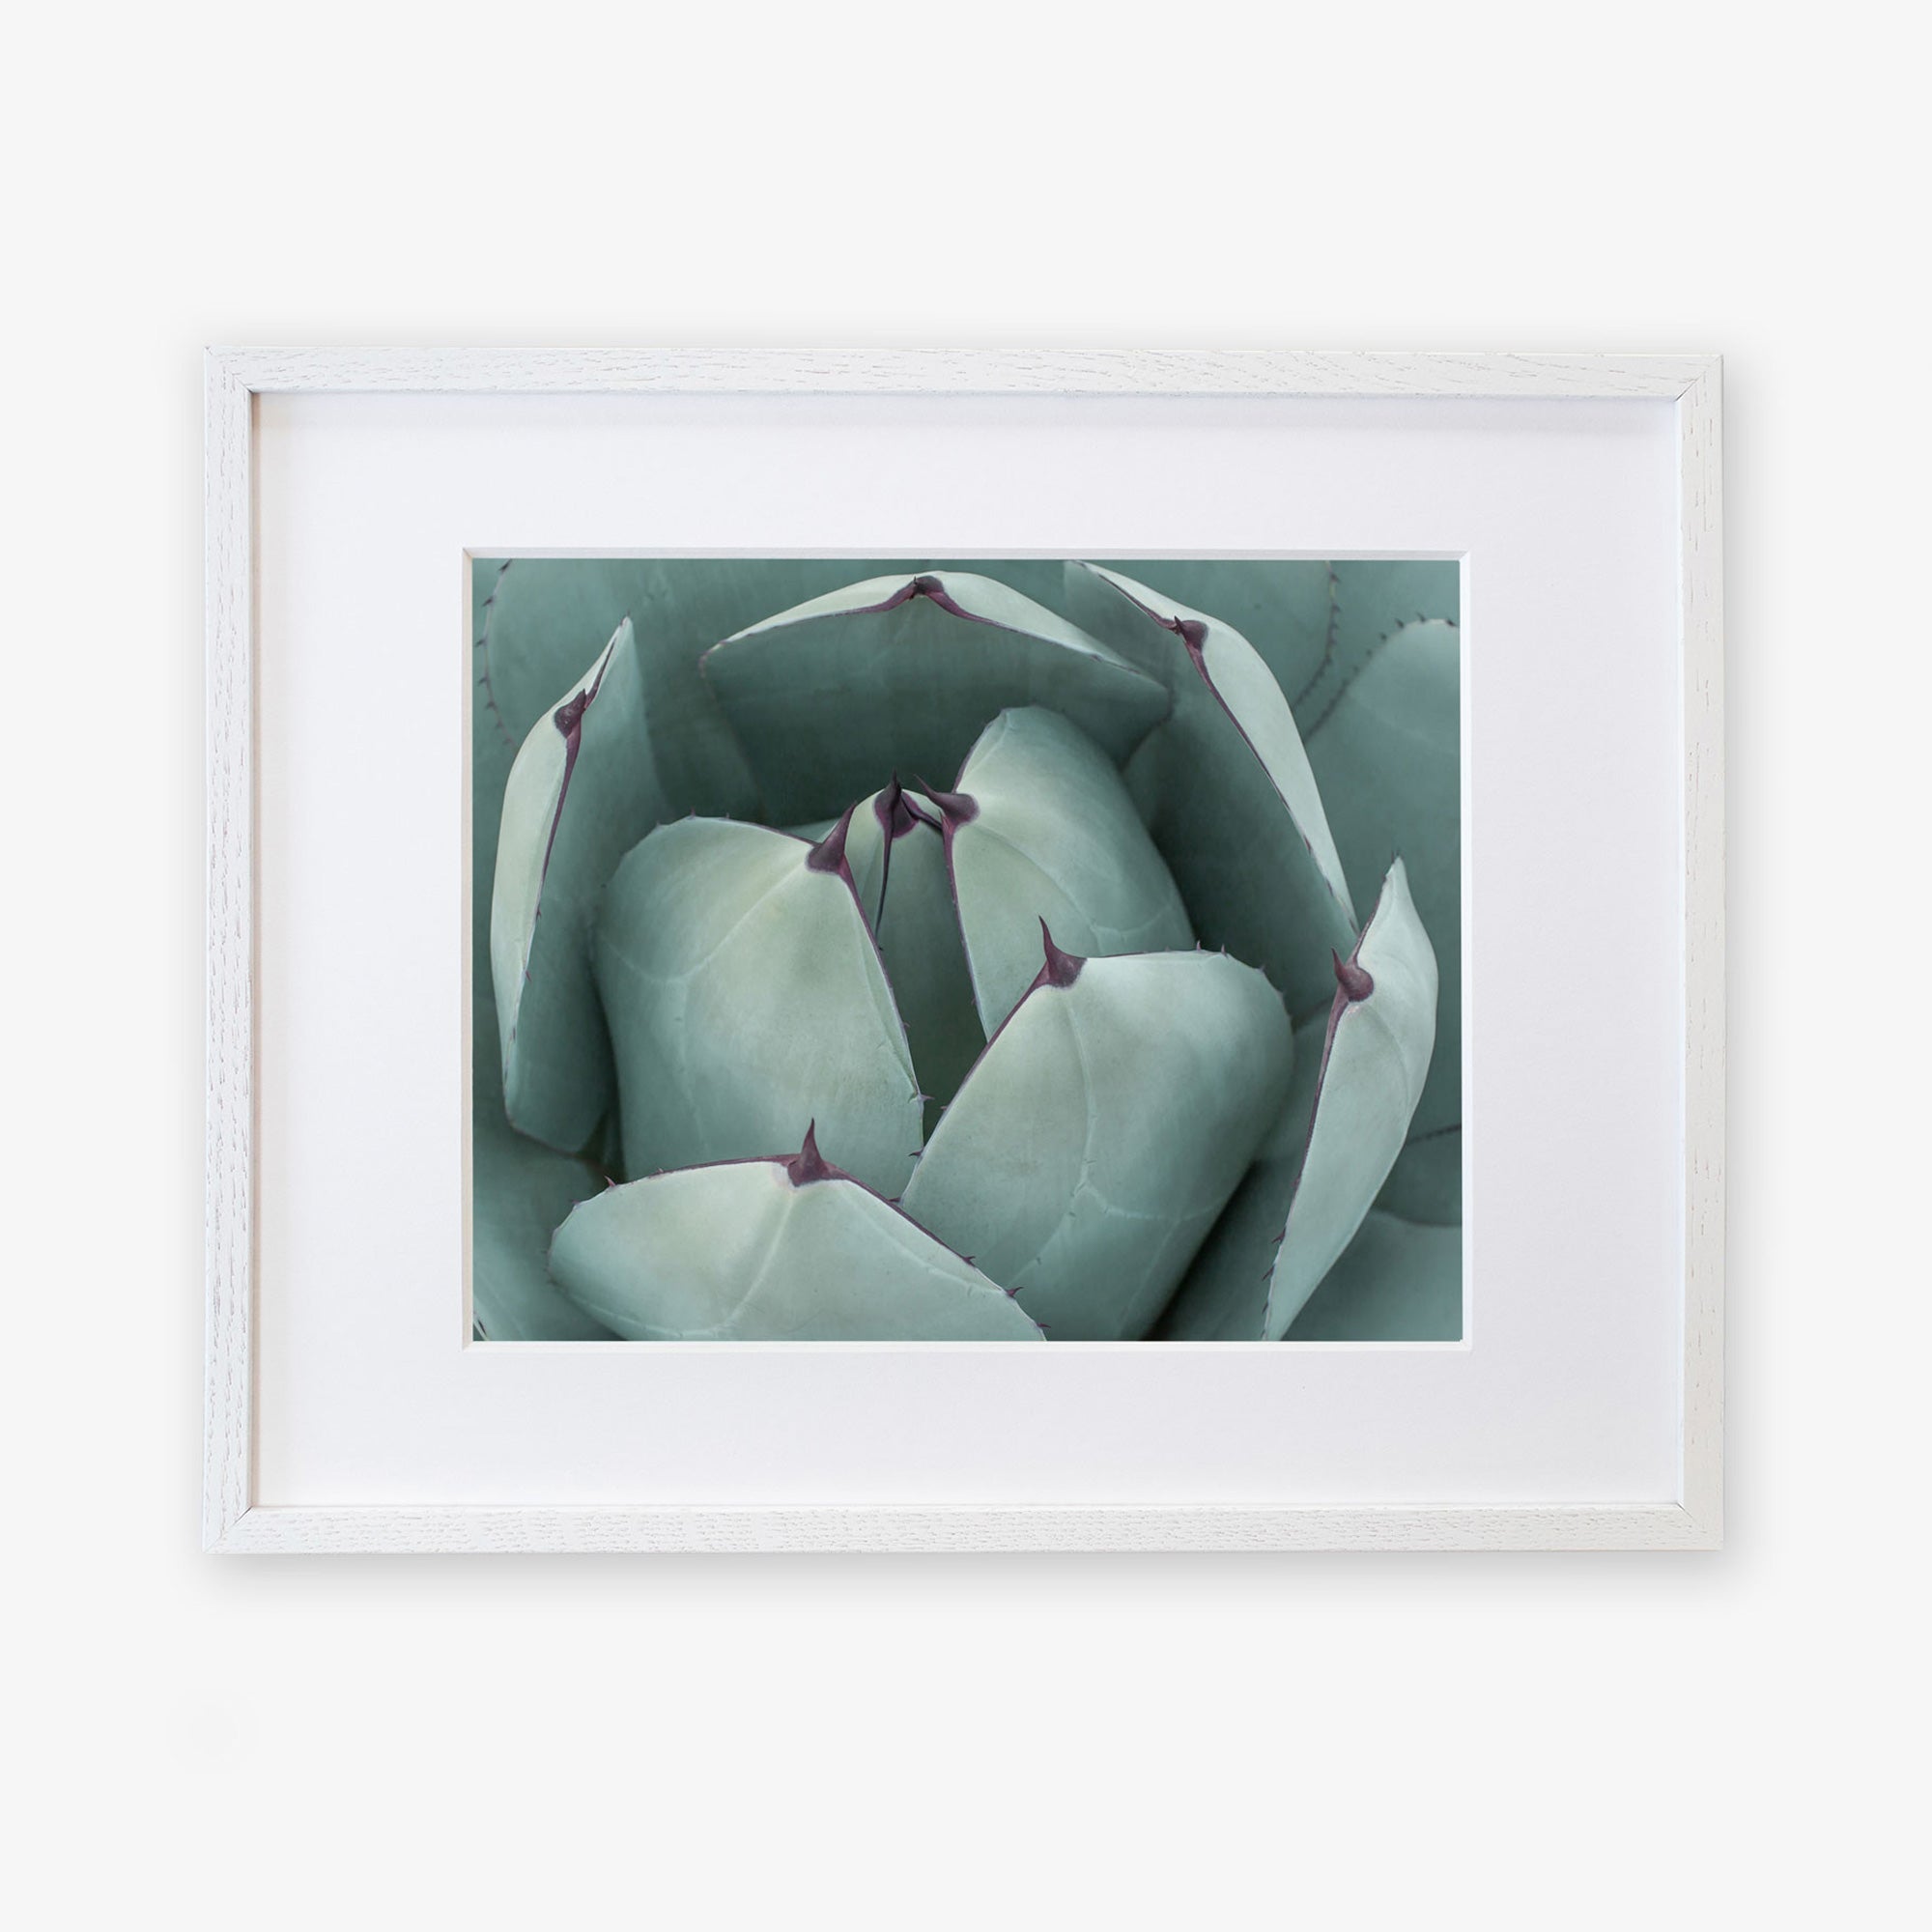 Unframed photograph of Abstract Teal Green Botanical Print &#39;Teal Petals&#39; by Offley Green, displayed against a white background.